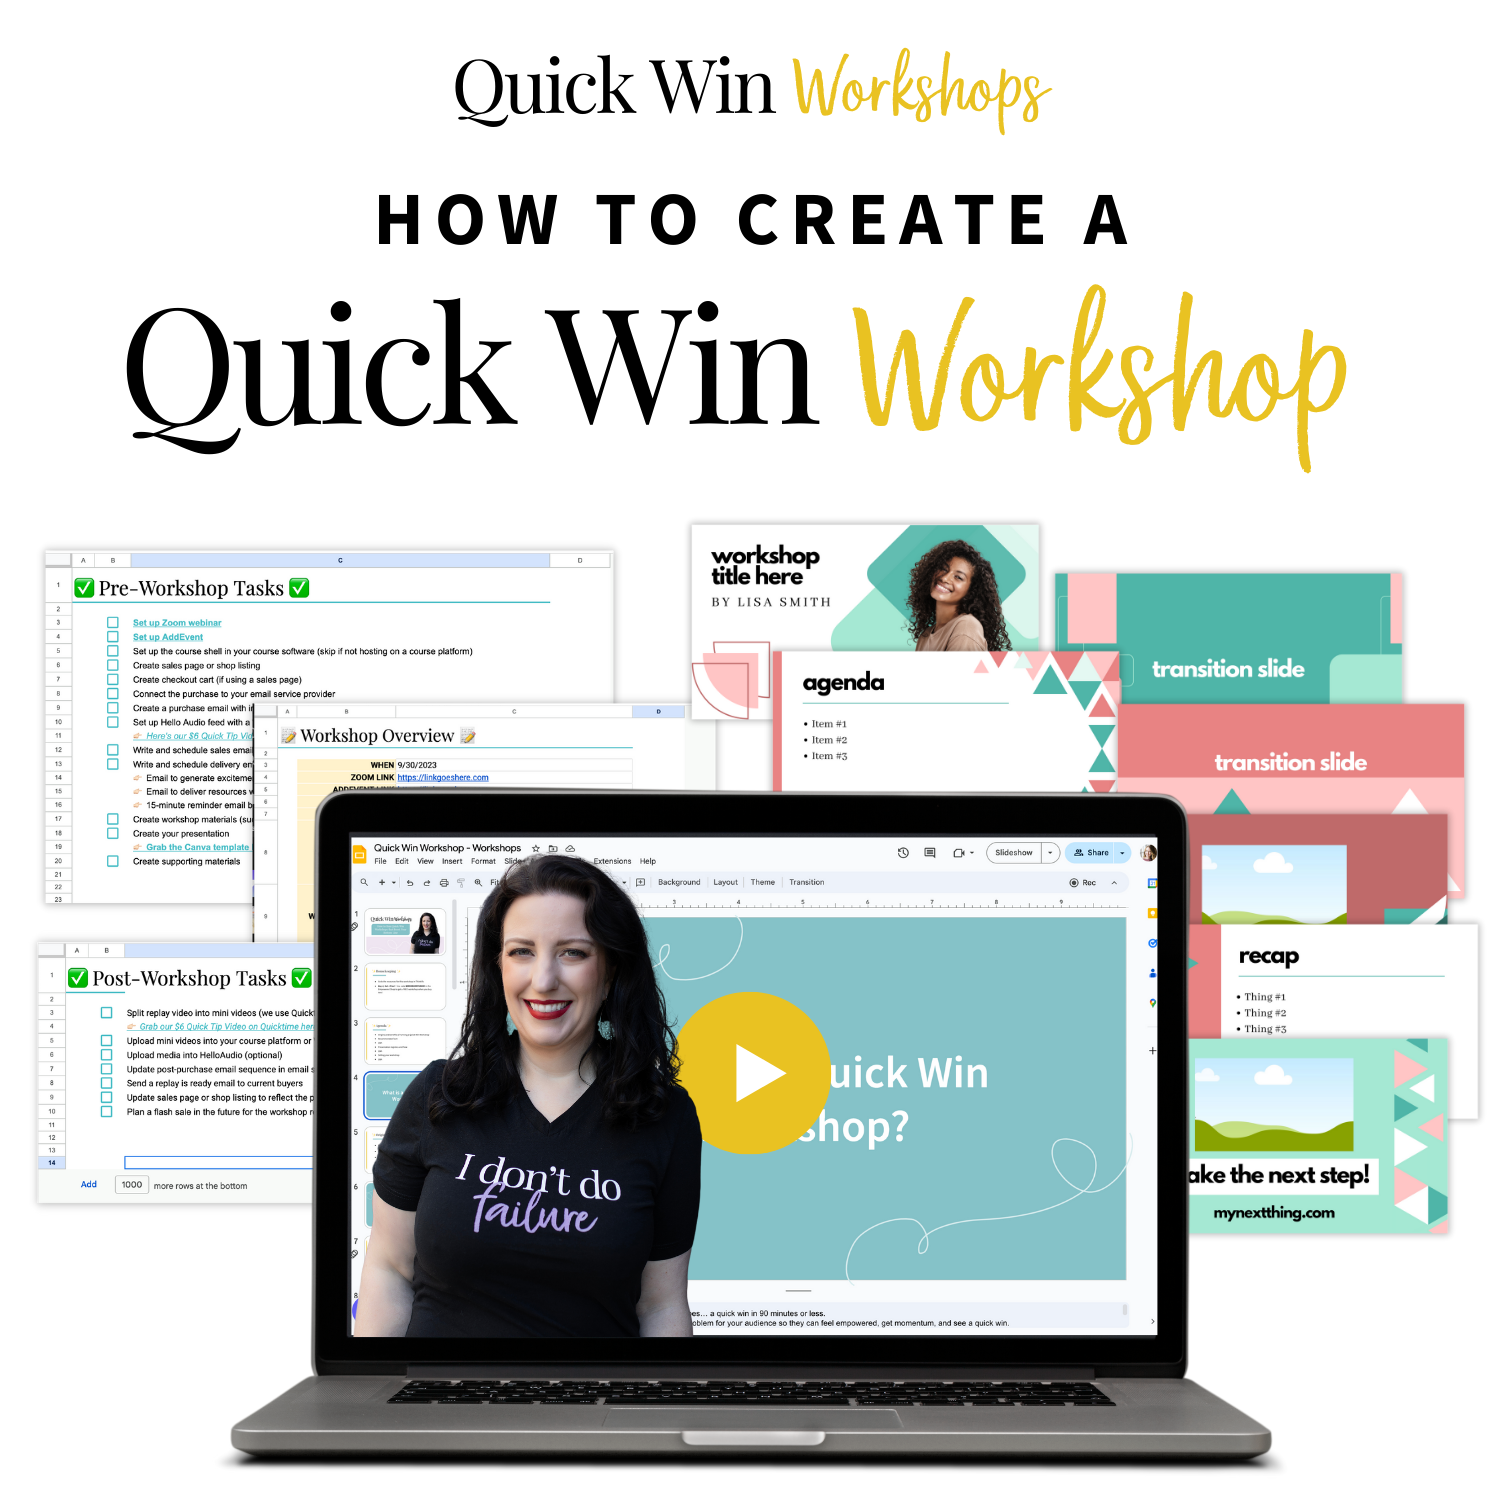 Quick Win Workshops that Boost Your Bottom Line